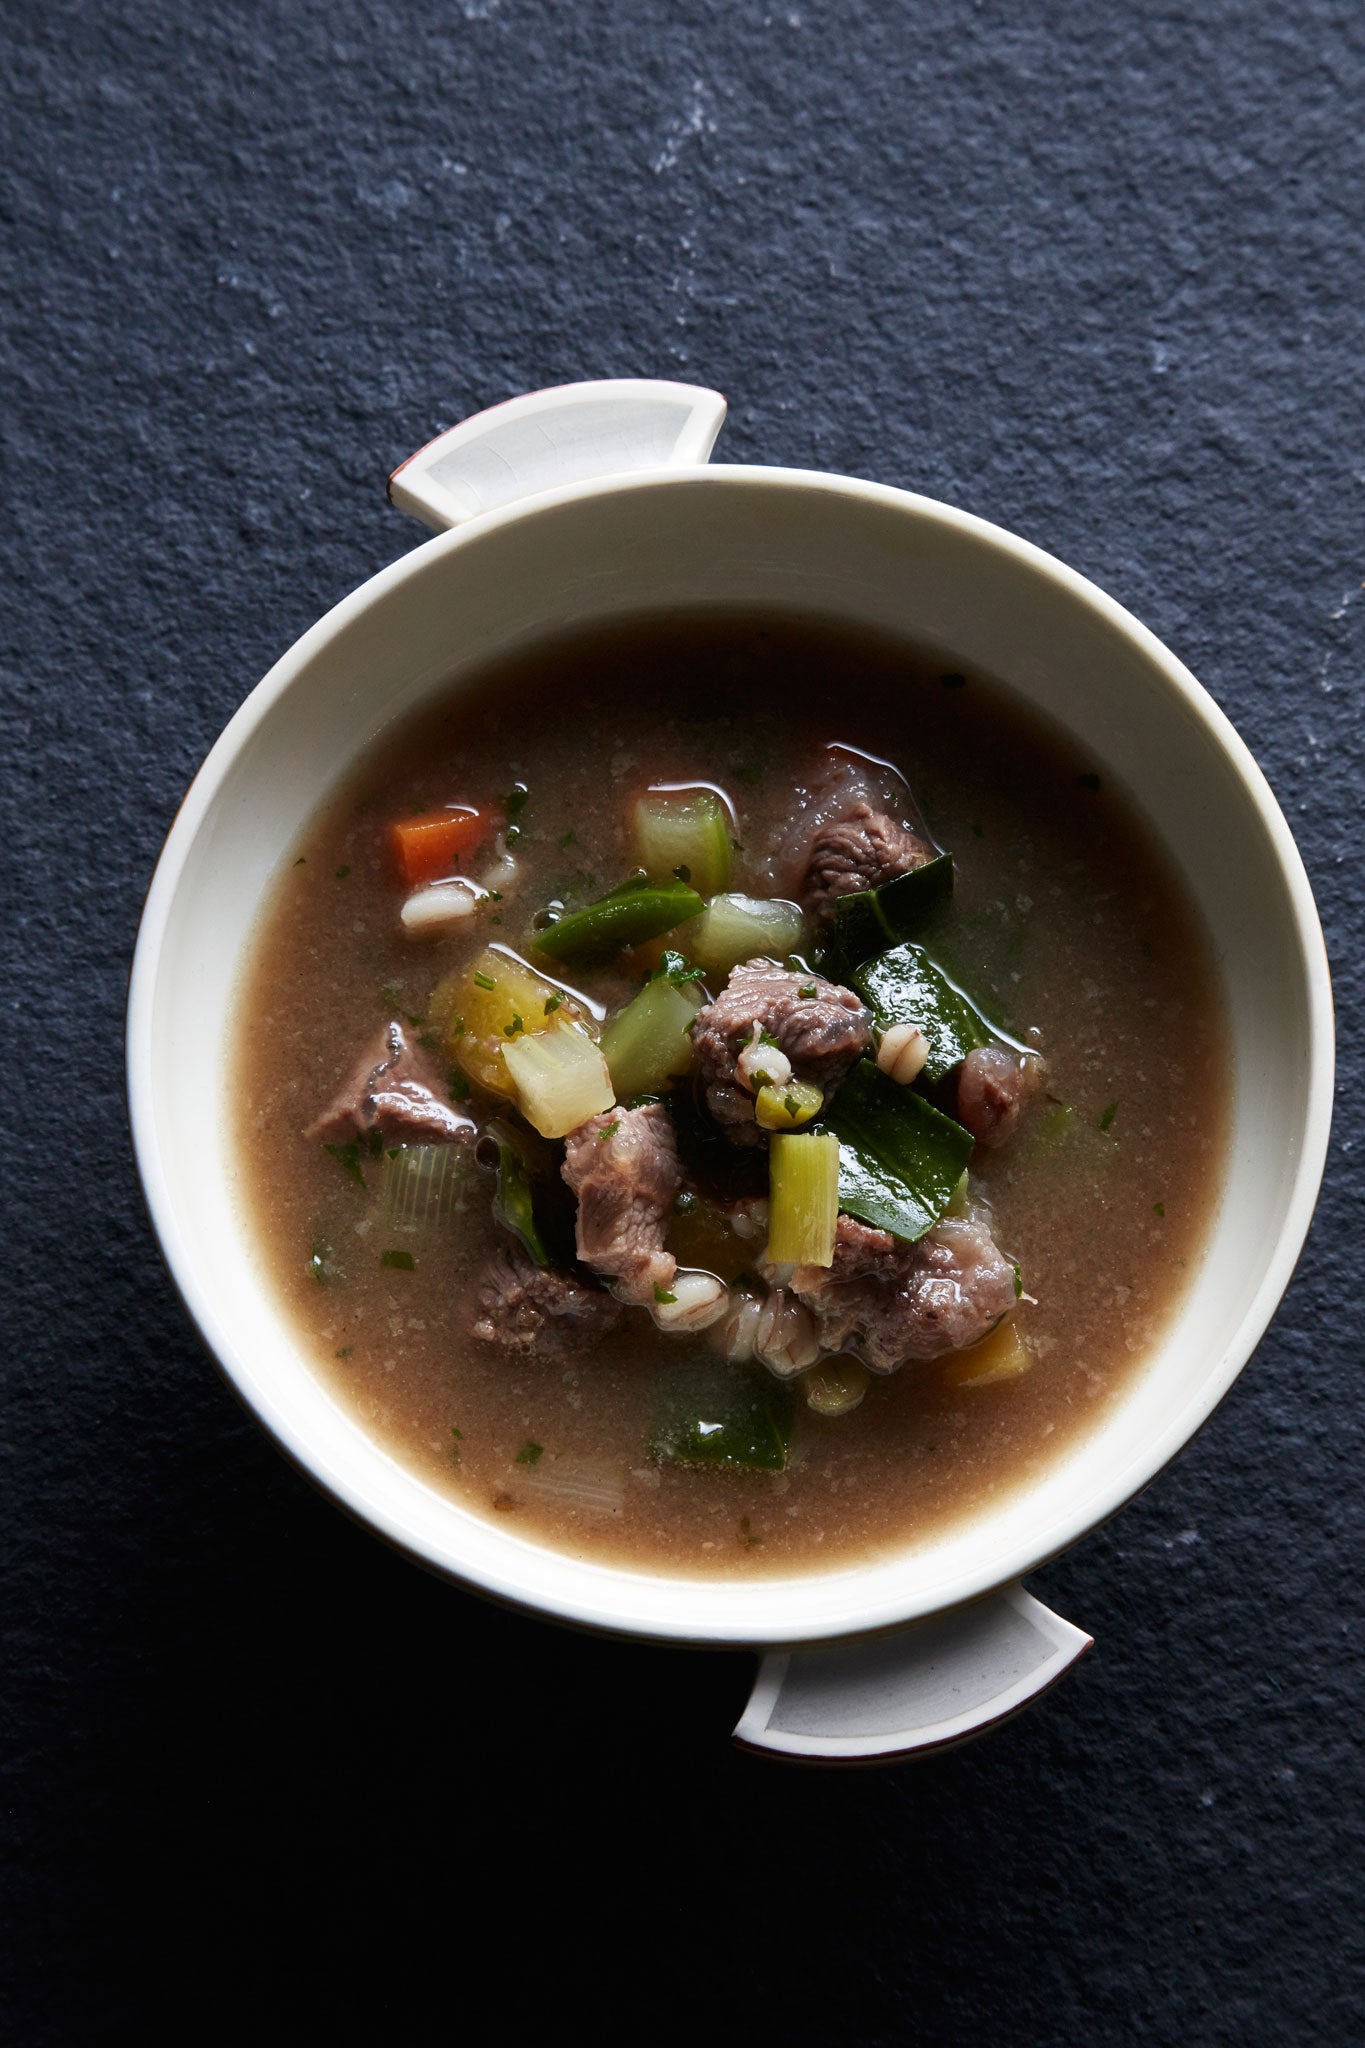 Mutton is the best meat to use in Mark's Scotch broth